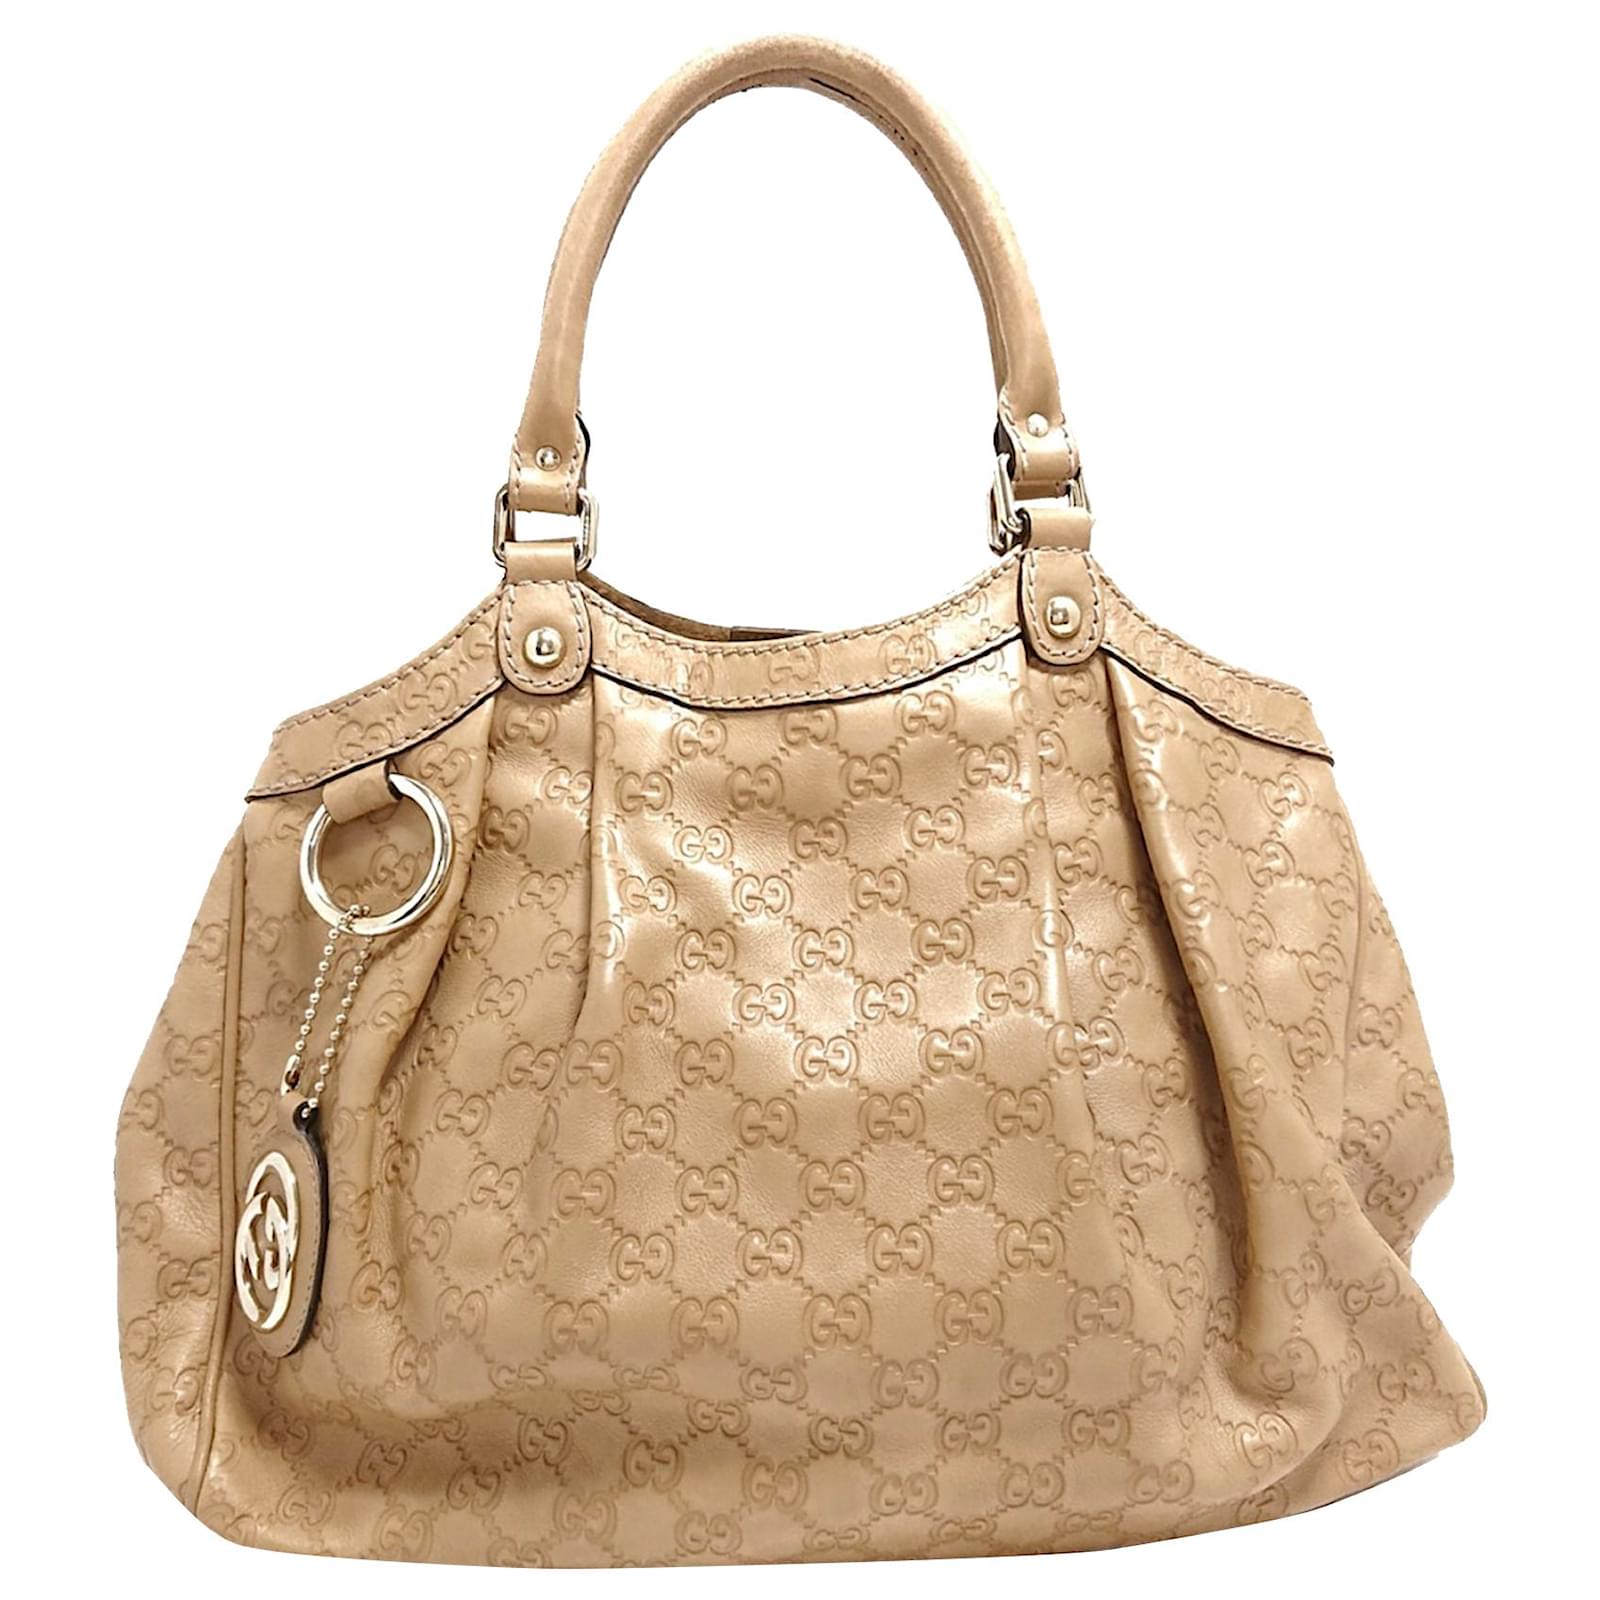 Gucci Brown Guccisima Sukey Tote Bag Light brown Leather Pony-style ...